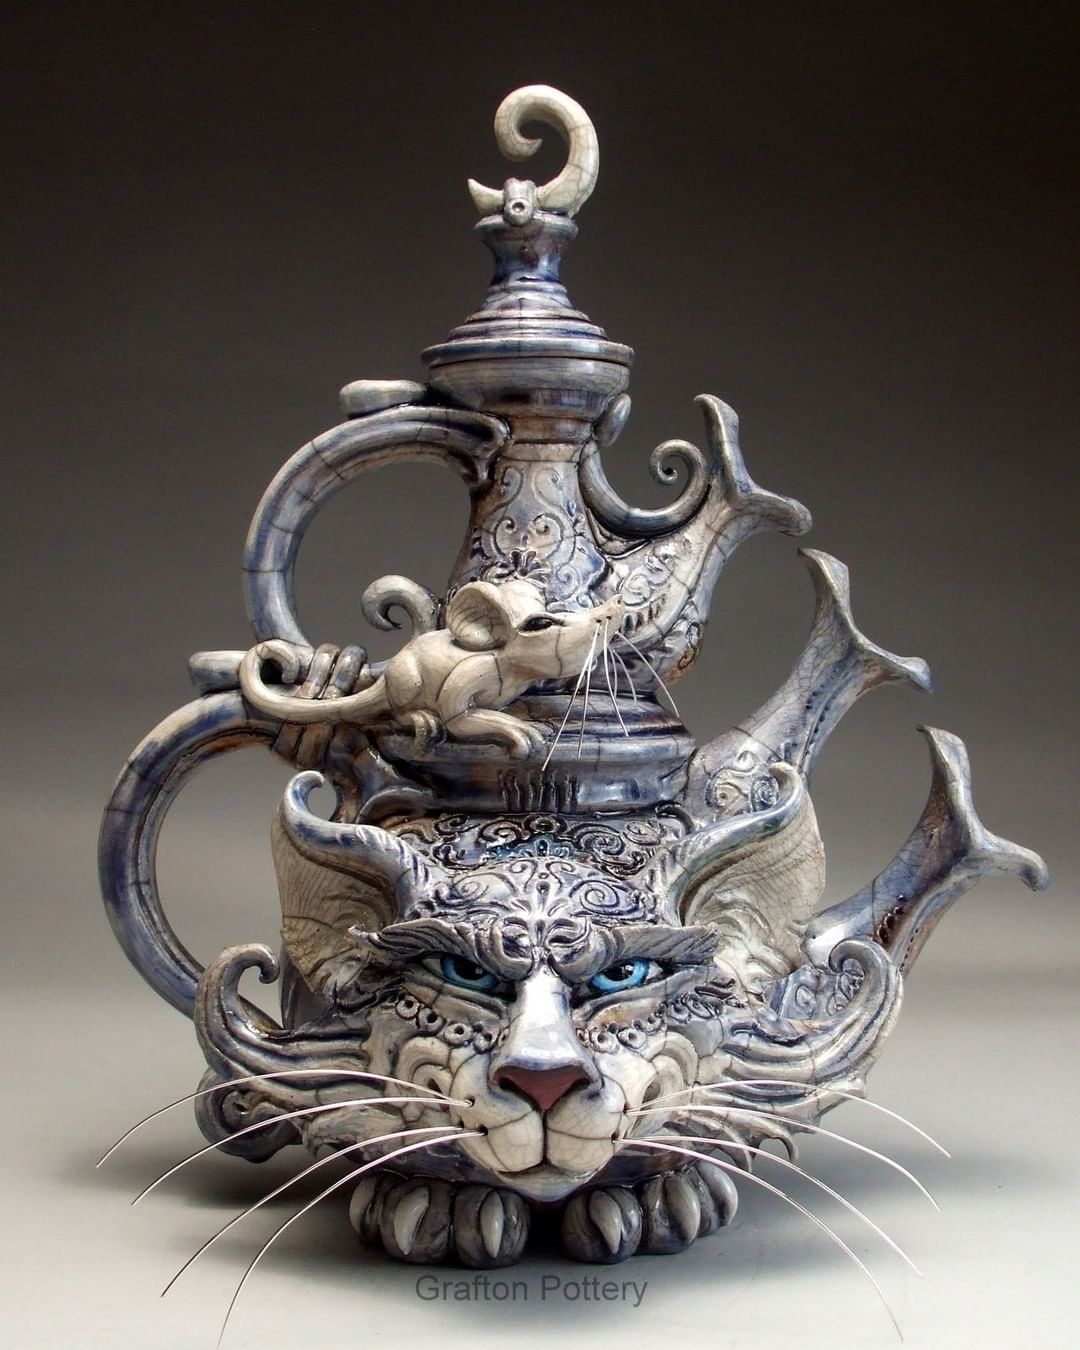 Ceramic Fairytales, Intricate Sculptures, Teapots, And Mugs By Mitchell Grafton (17)